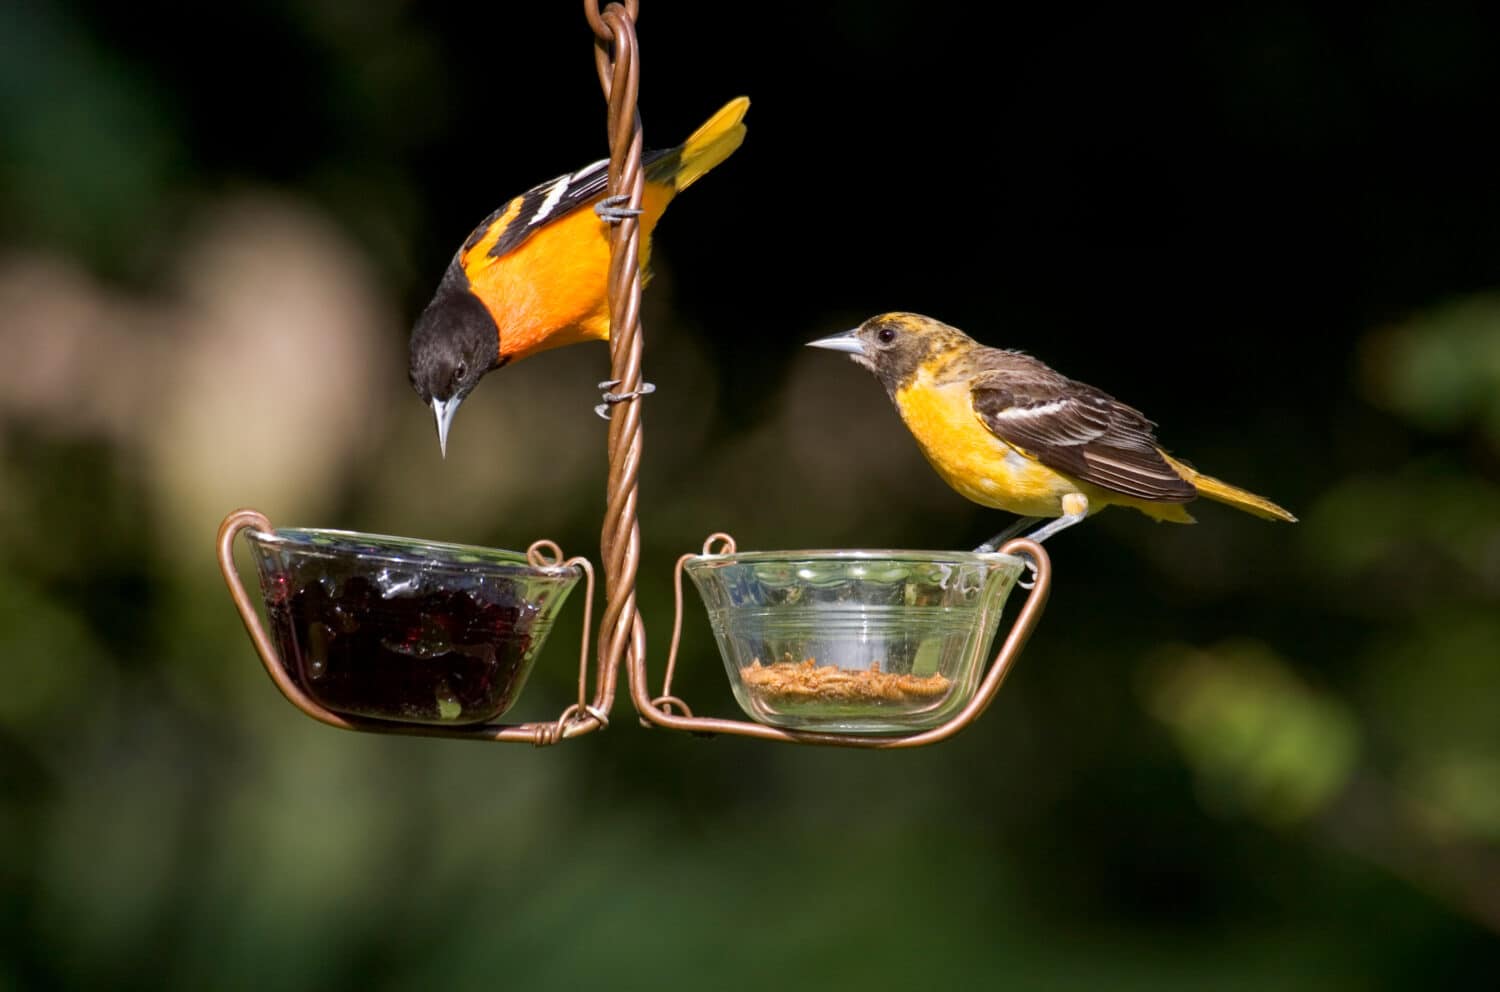 Baltimore Orioles (Icterus galbula) male and female on grape jelly and mealworm feeder, Marion, Illinois, USA.